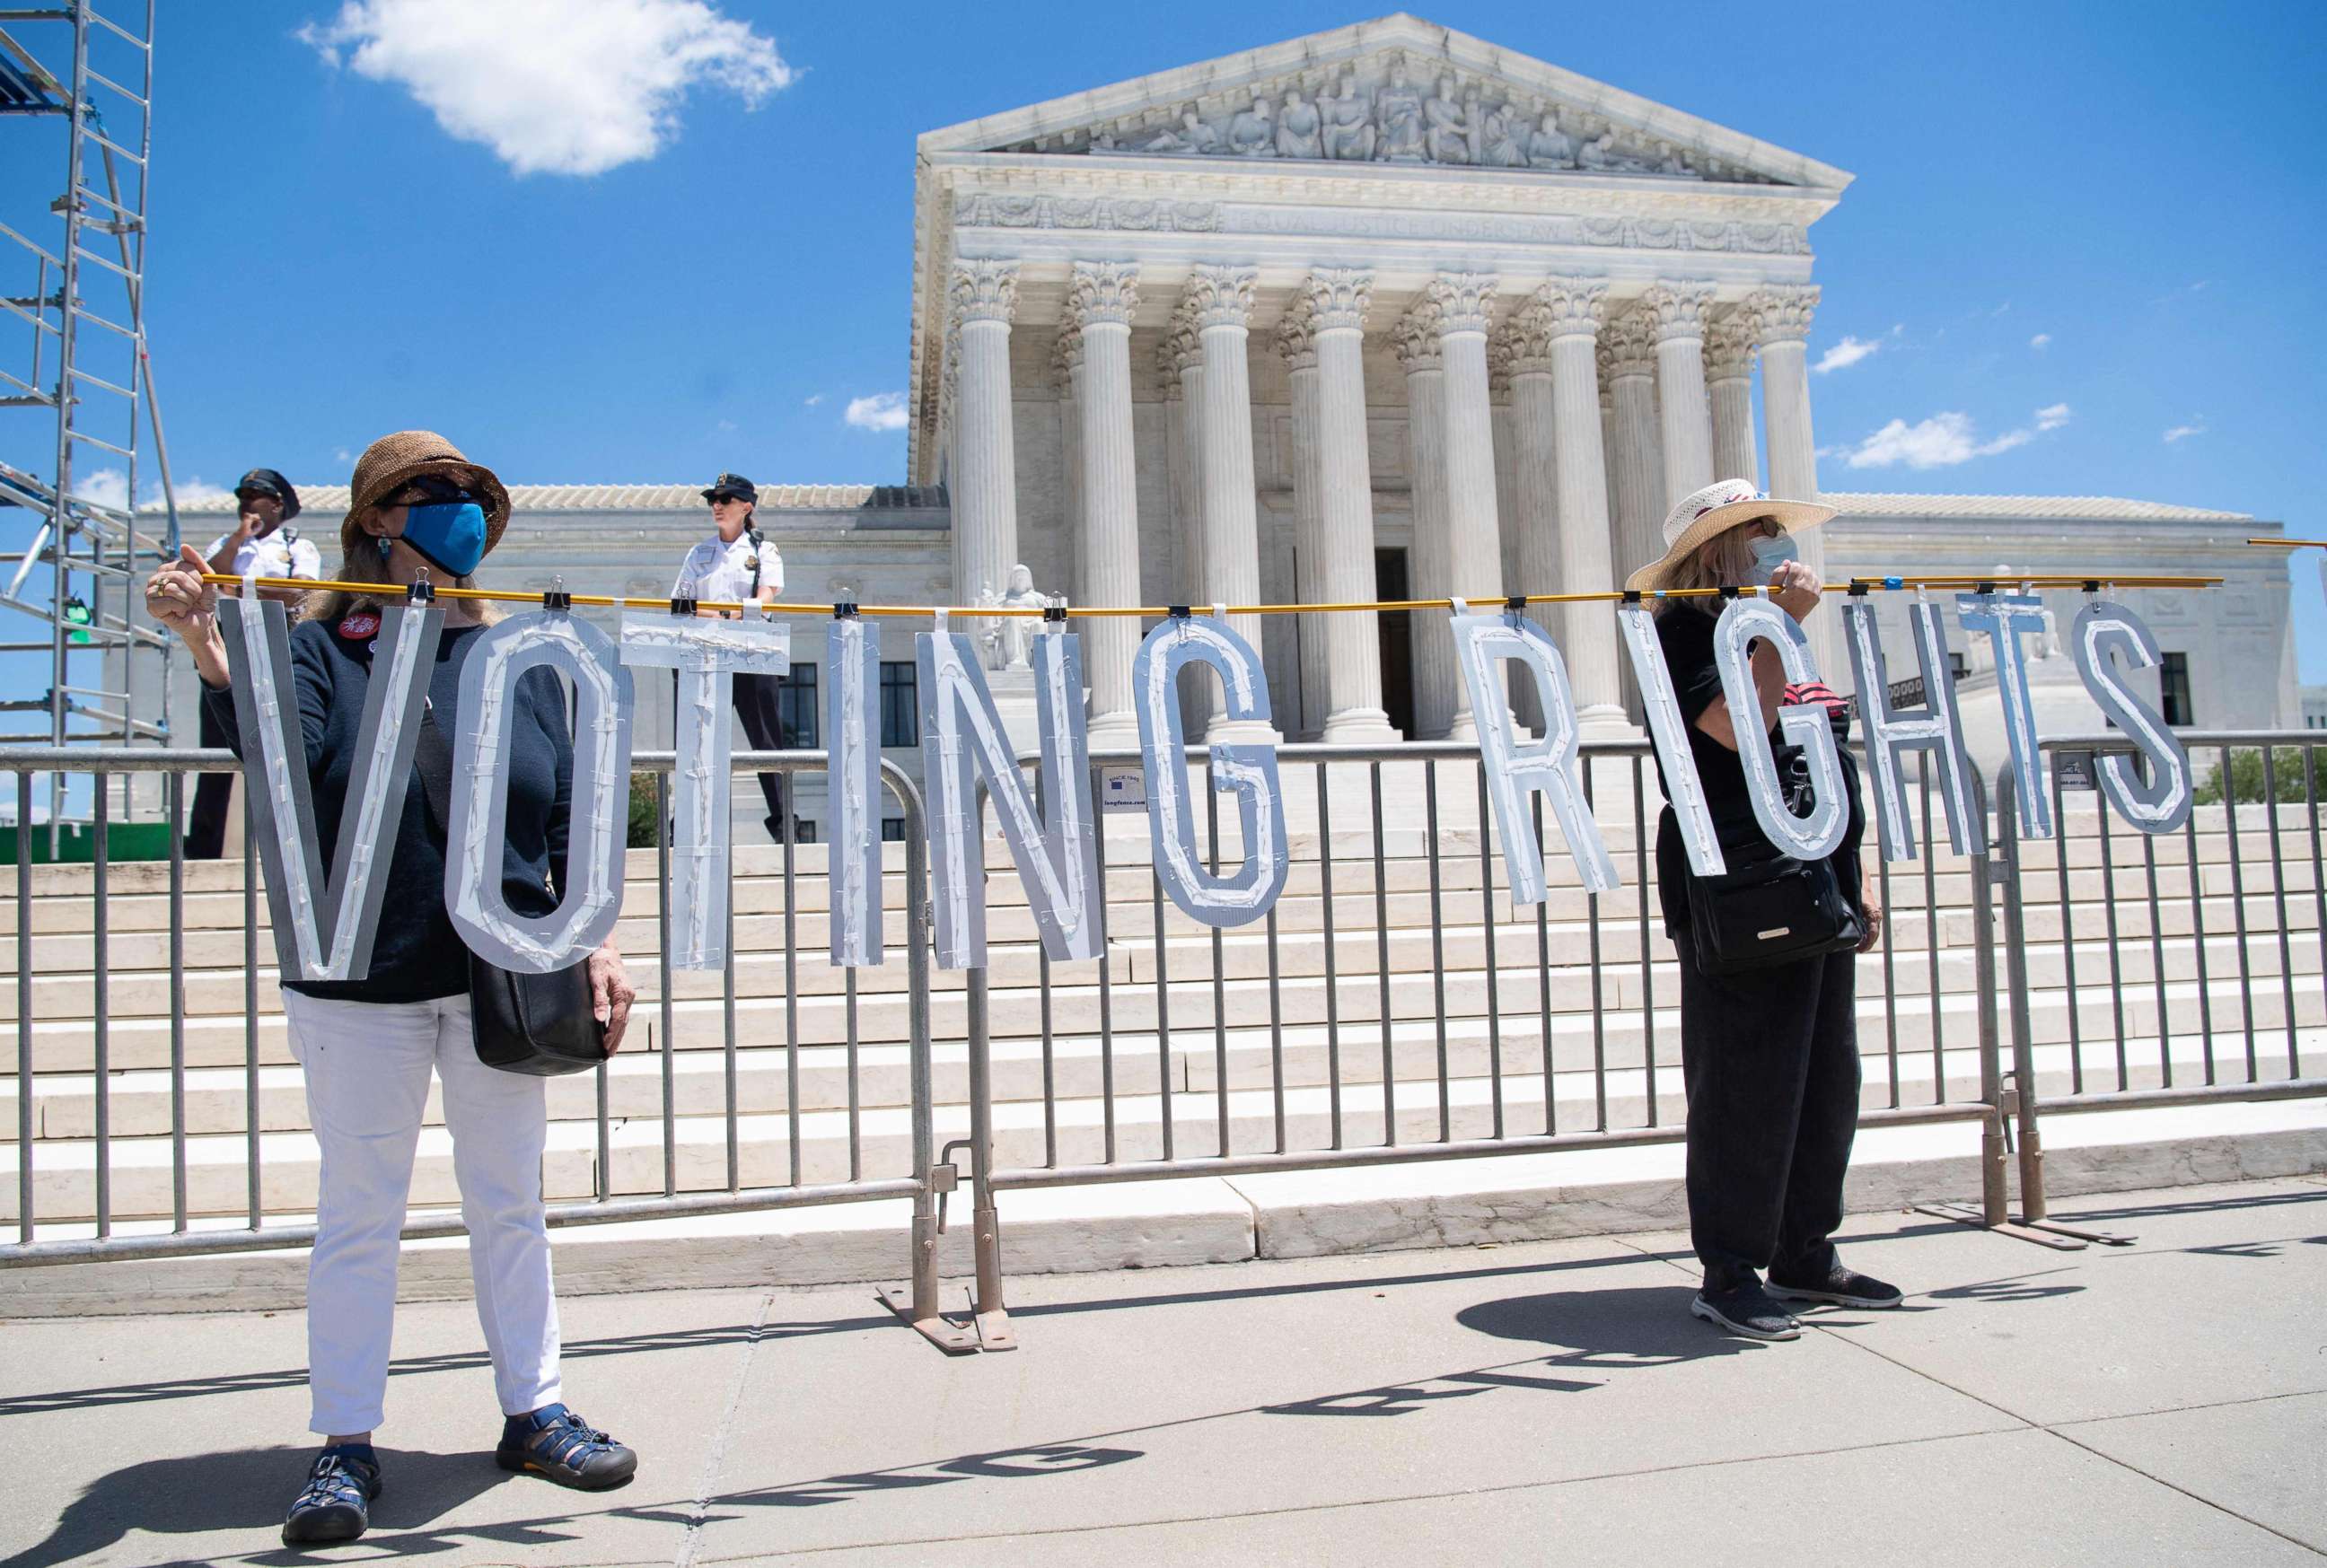 Demonstrators call for senators to support the elimination of the Senate filibuster in order to pass voting rights legislation and economic relief bills, as they protest during the "Moral March" outside the Supreme Court in Washington on June 23, 2021.